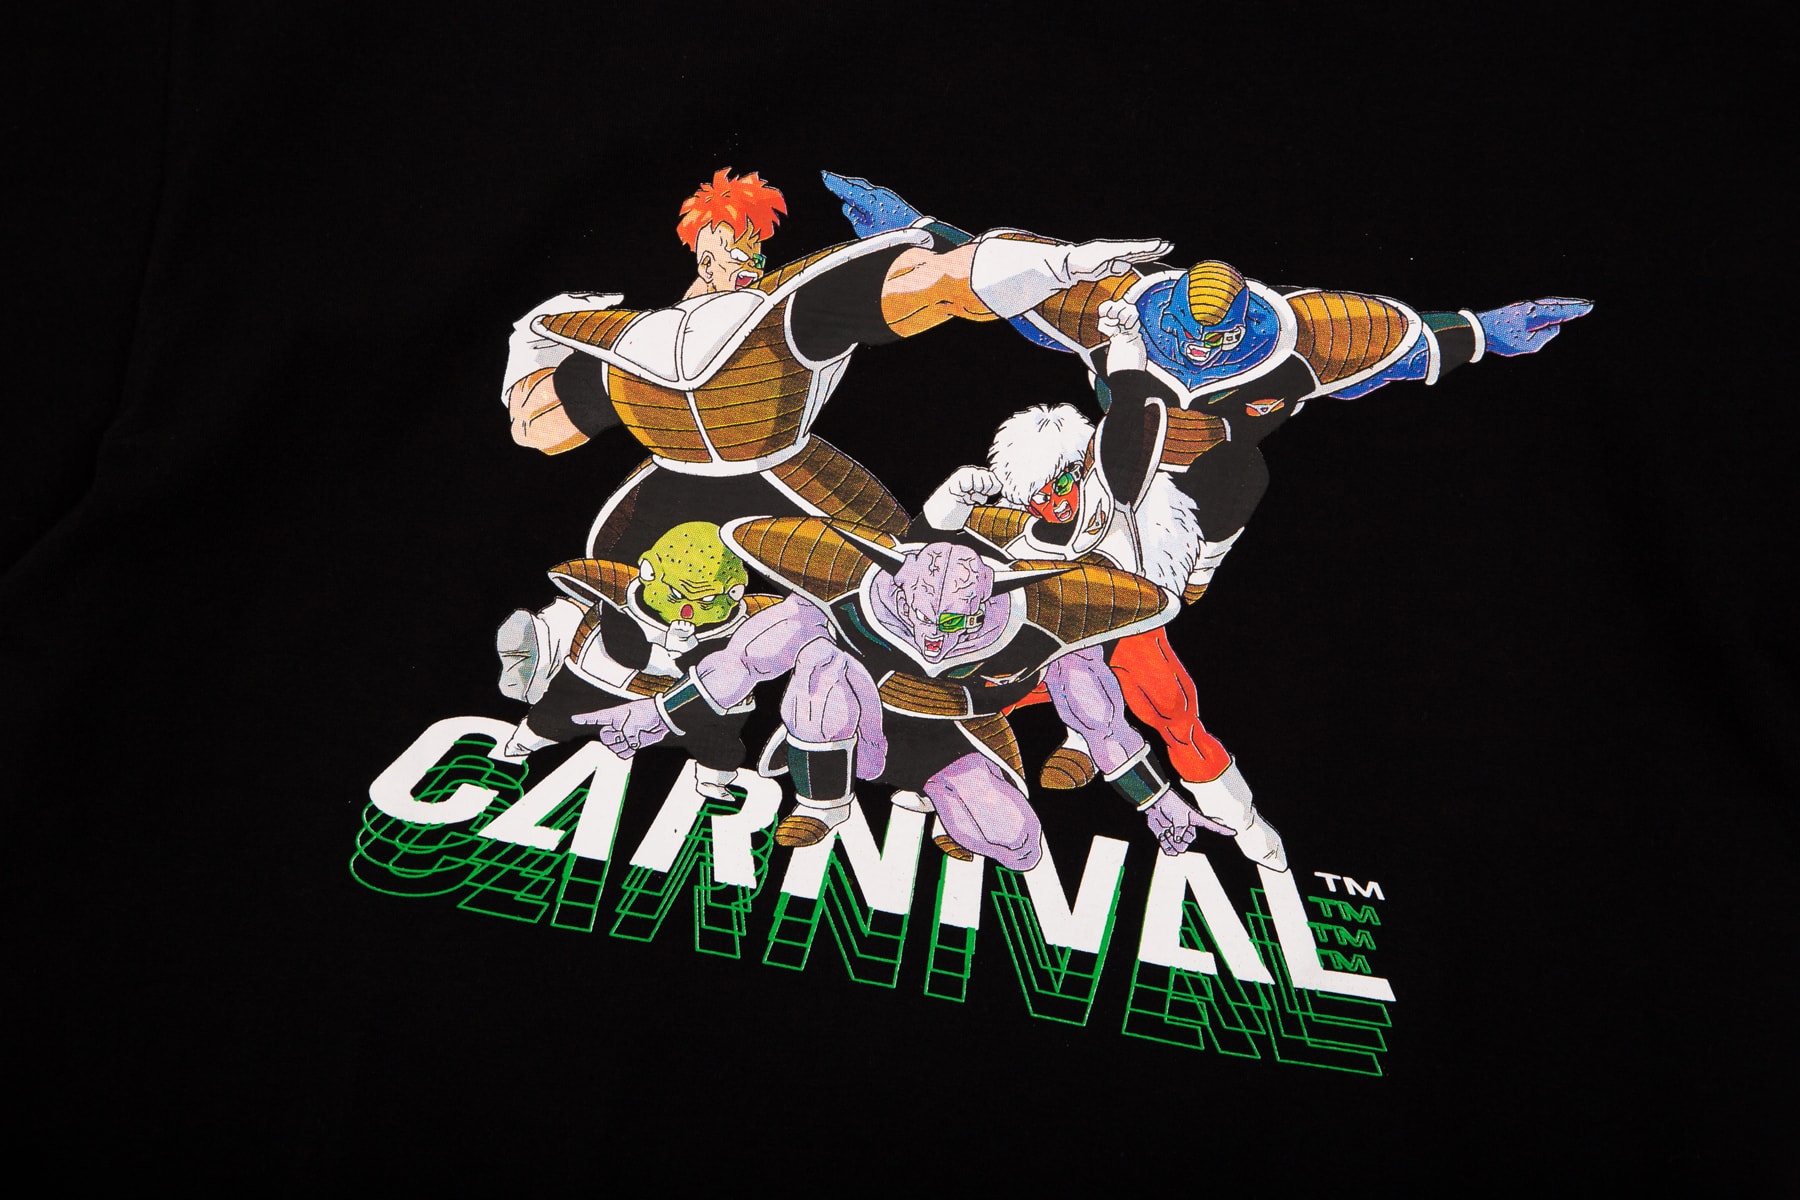 Dragon Ball Z CARNIVAL Collectors Capsule Collection Hoodie T-shirt Cap Hat Cushion Wrist Band Sticker Pack